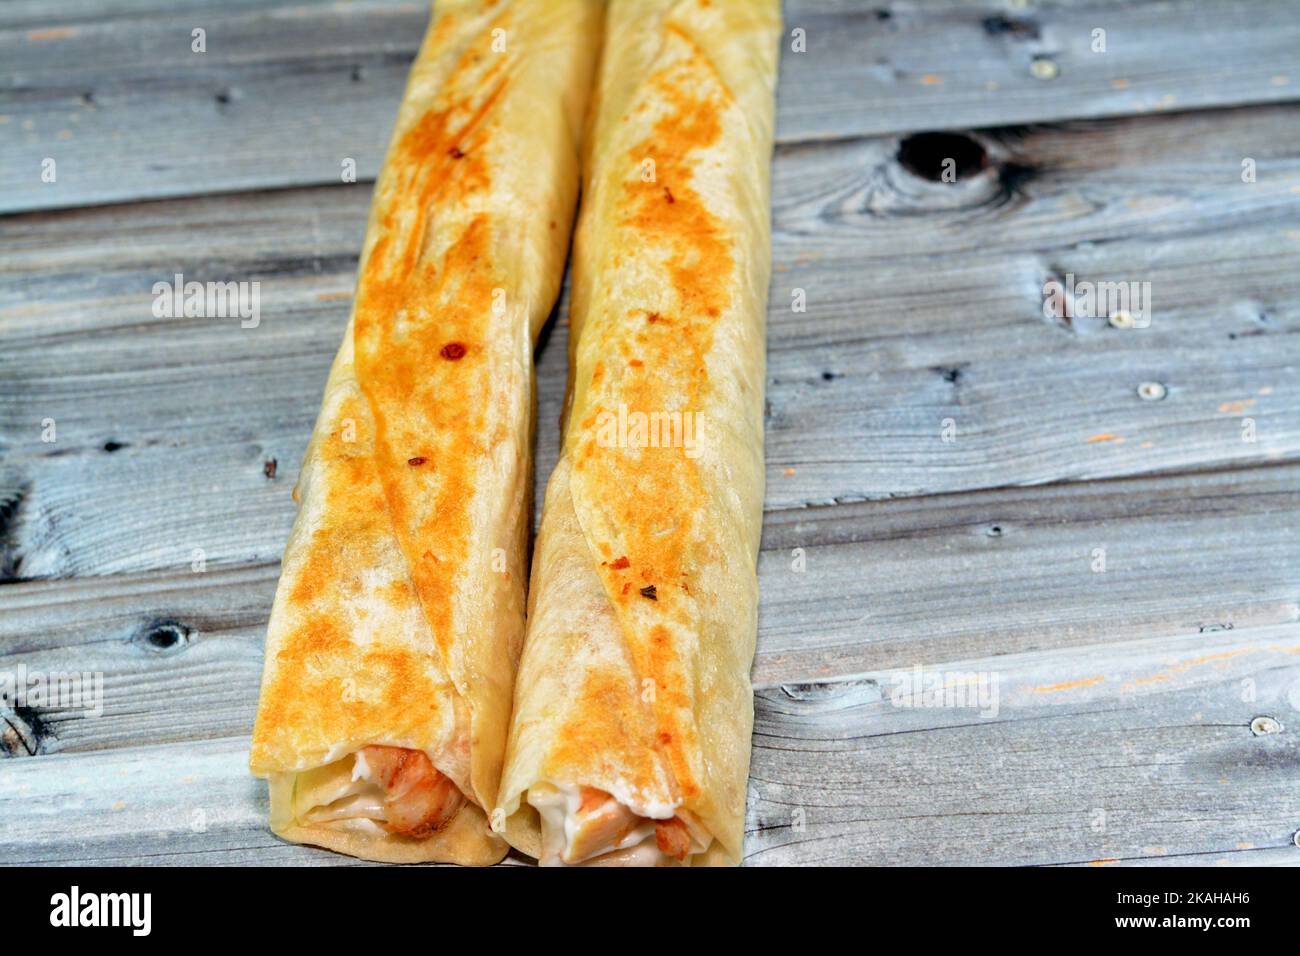 Syrian recipe cuisine background, chicken shawerma or shawarma tortilla wrap with onion, tomato, lettuce and garlic sauce in Syrian bread isolated on Stock Photo